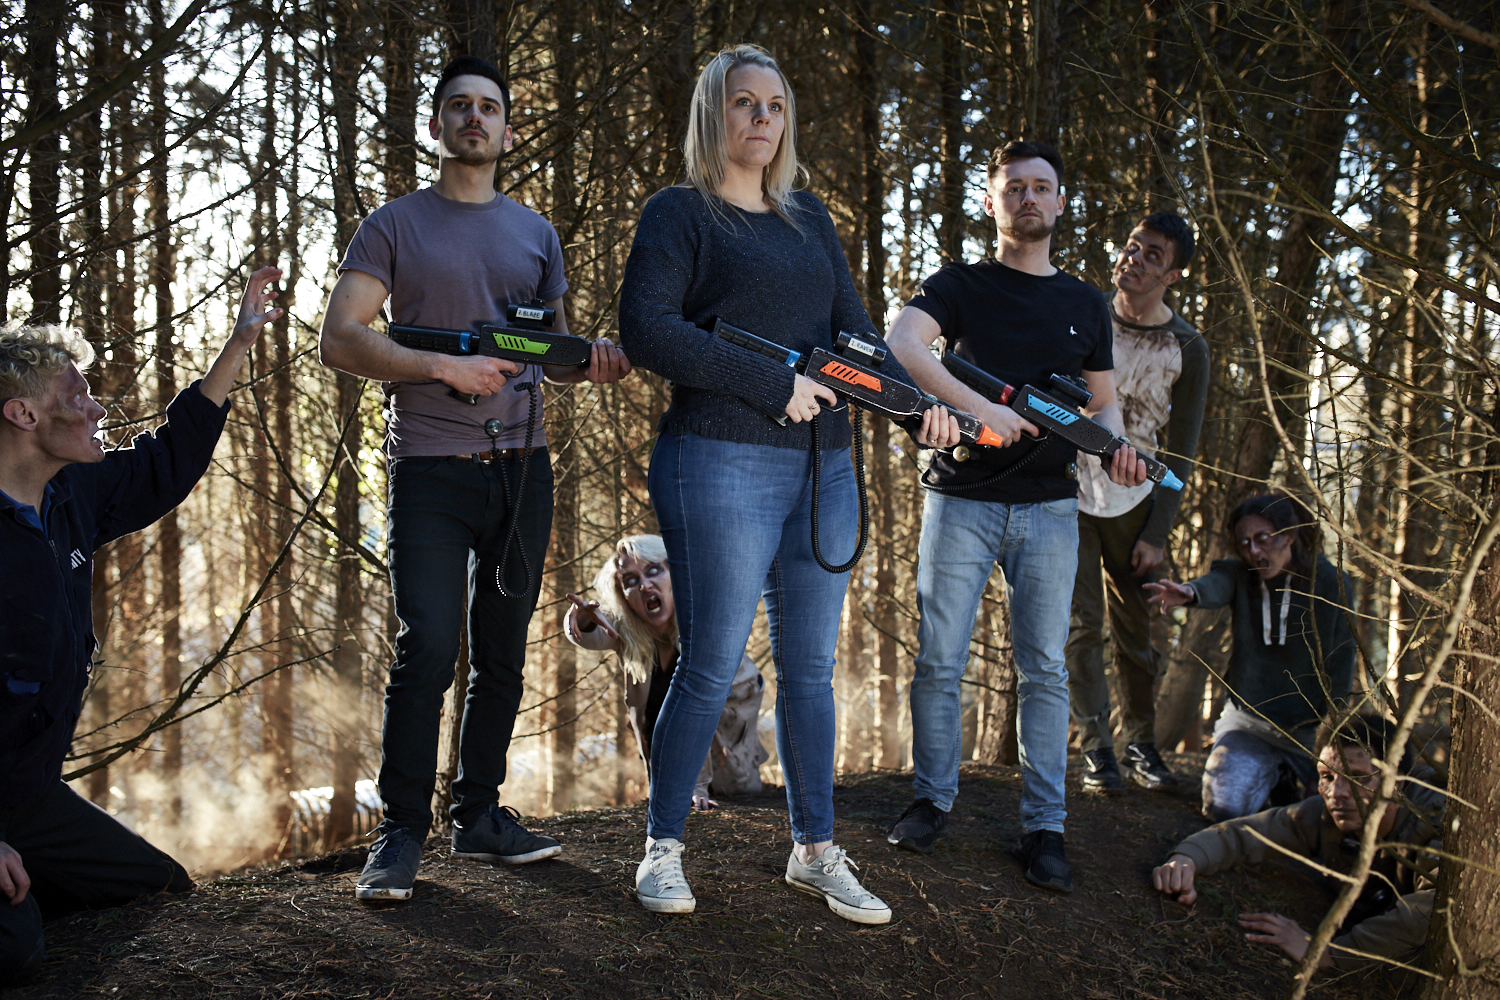 Zombie Hunt, group standing ready with guns and zombies lurching towards them